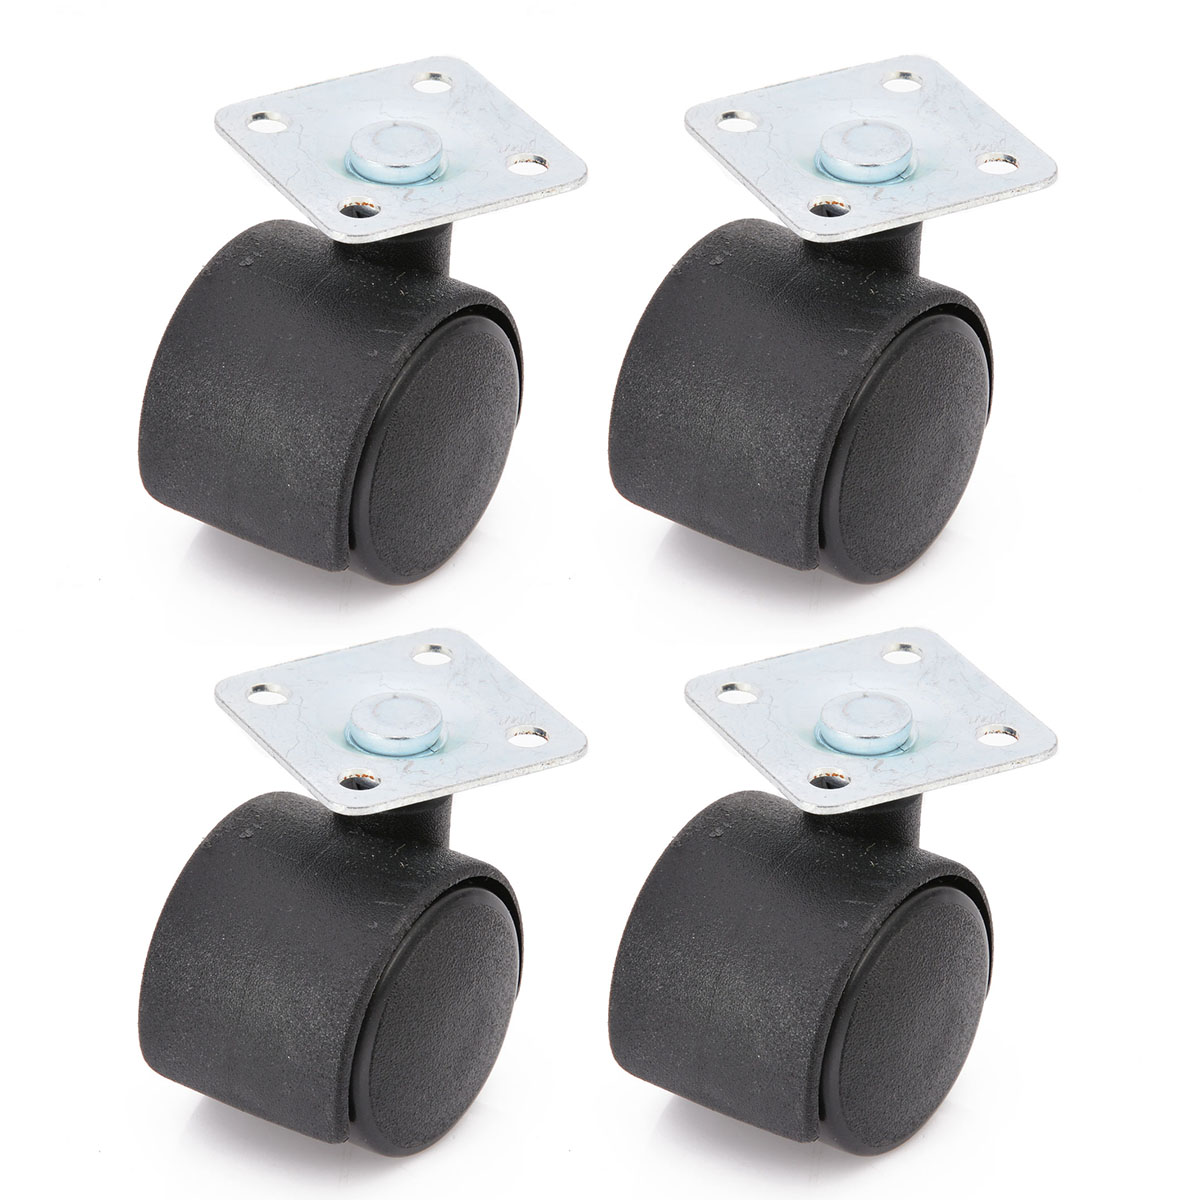 4pcs/set Office Chair Table Castor Wheels Roller Casters Black 30mm Swivel Plate Caster Nylon Wheel Home Furniture Replacement